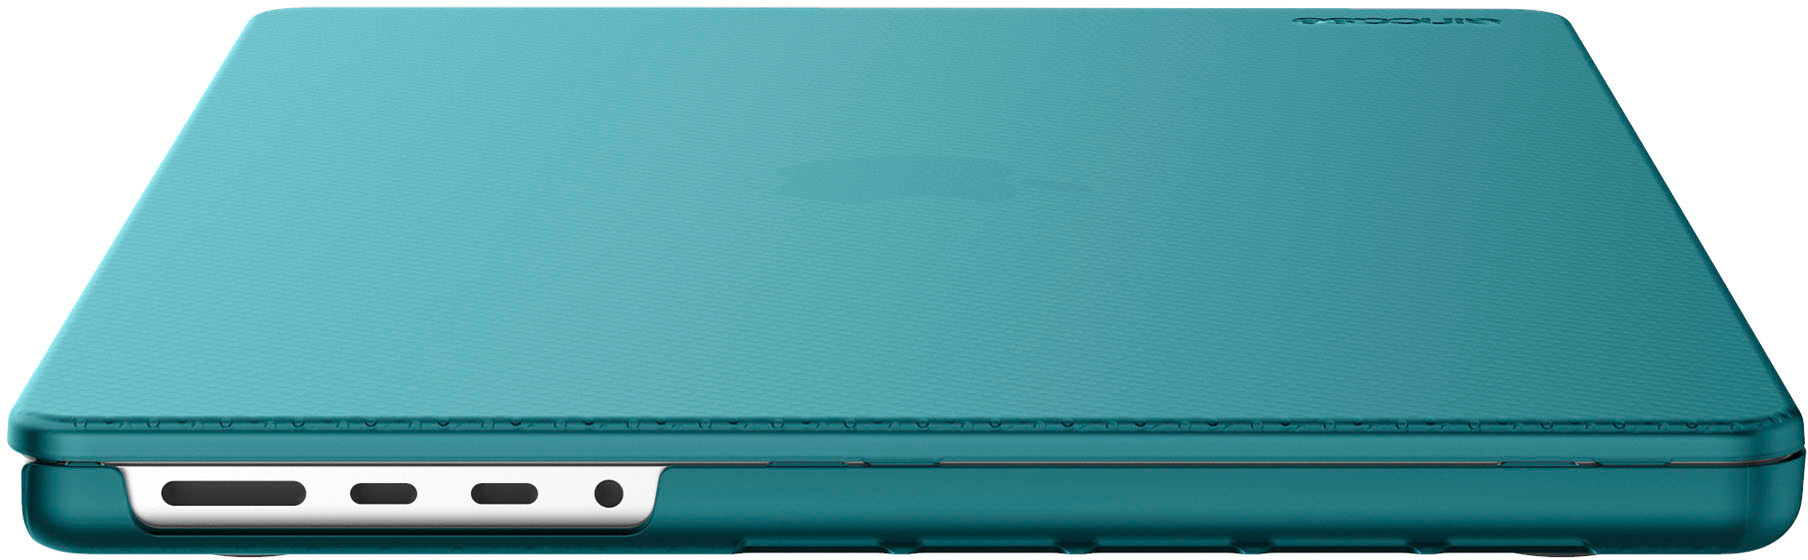 Hardshell Case for MacBook Pro or Air (Various Colors) - Best Deal in Town  Tempe Arizona